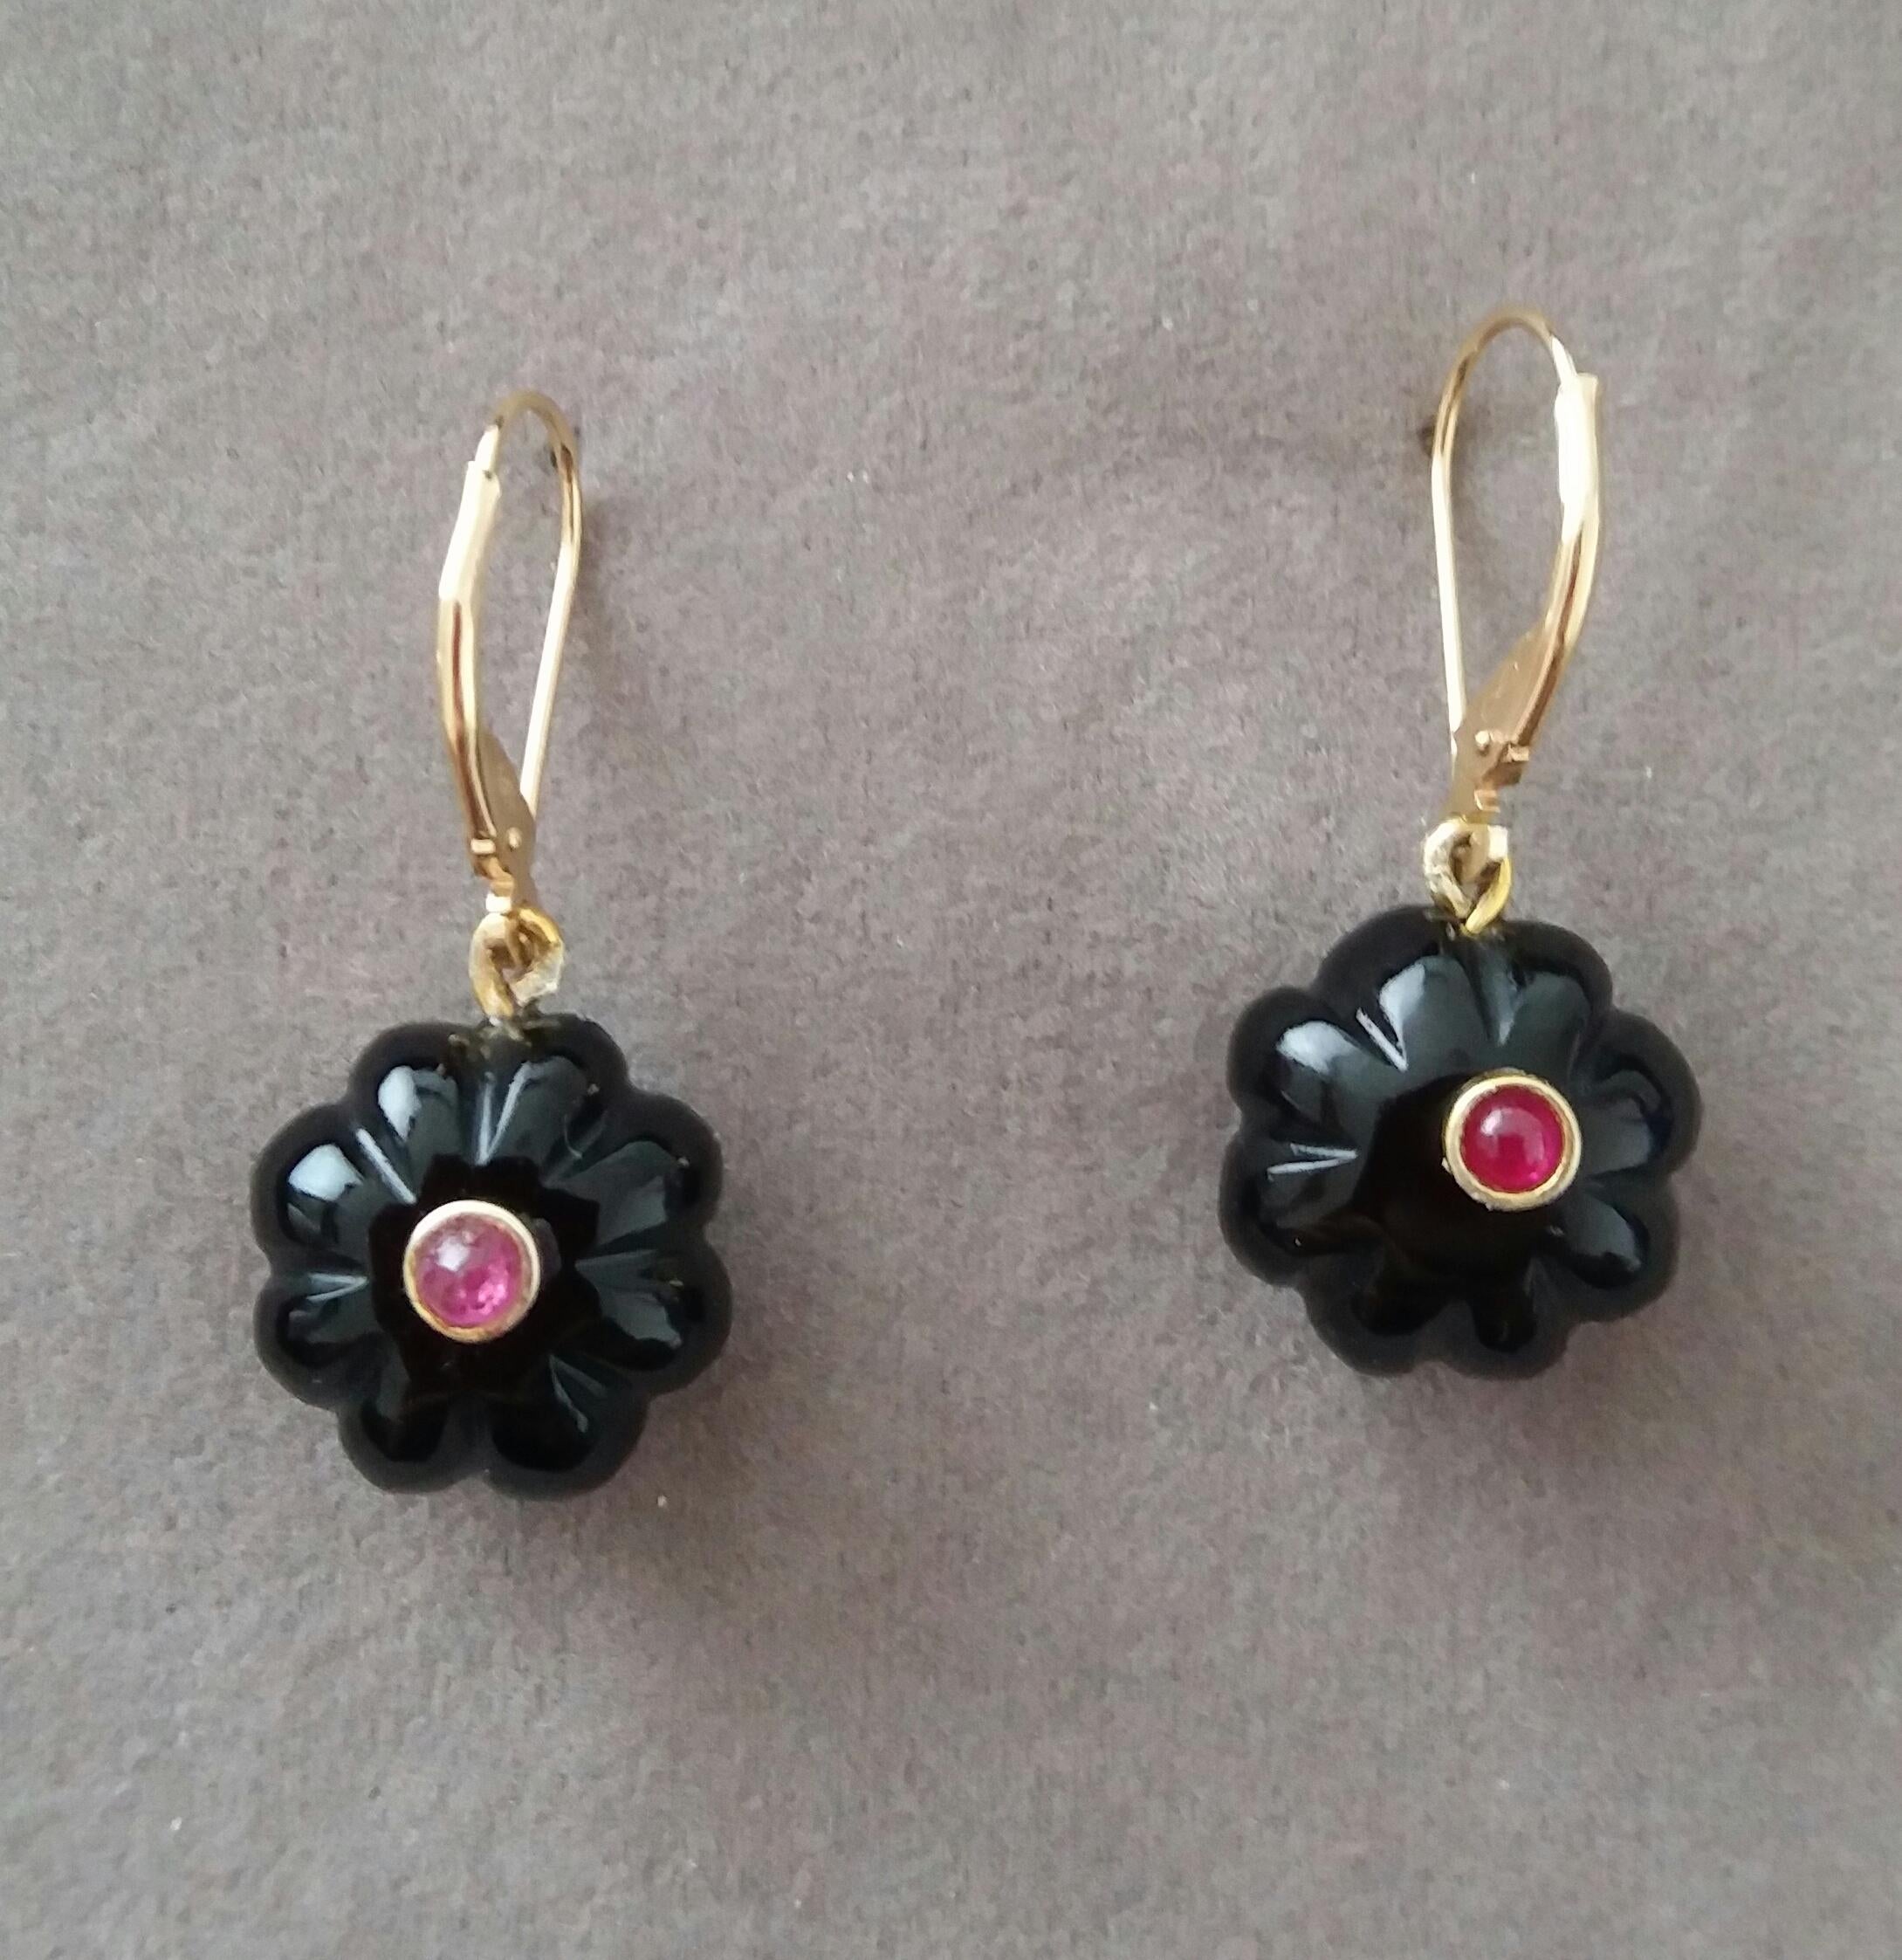 Simple chic earrings composed of 2 Black Onyx Round Carved Buttons of 13 mm in diameter with a small Ruby cabochon in the center suspended by a 14 K yellow gold clip.

In 1978 our workshop started in Italy to make simple-chic Art Deco style